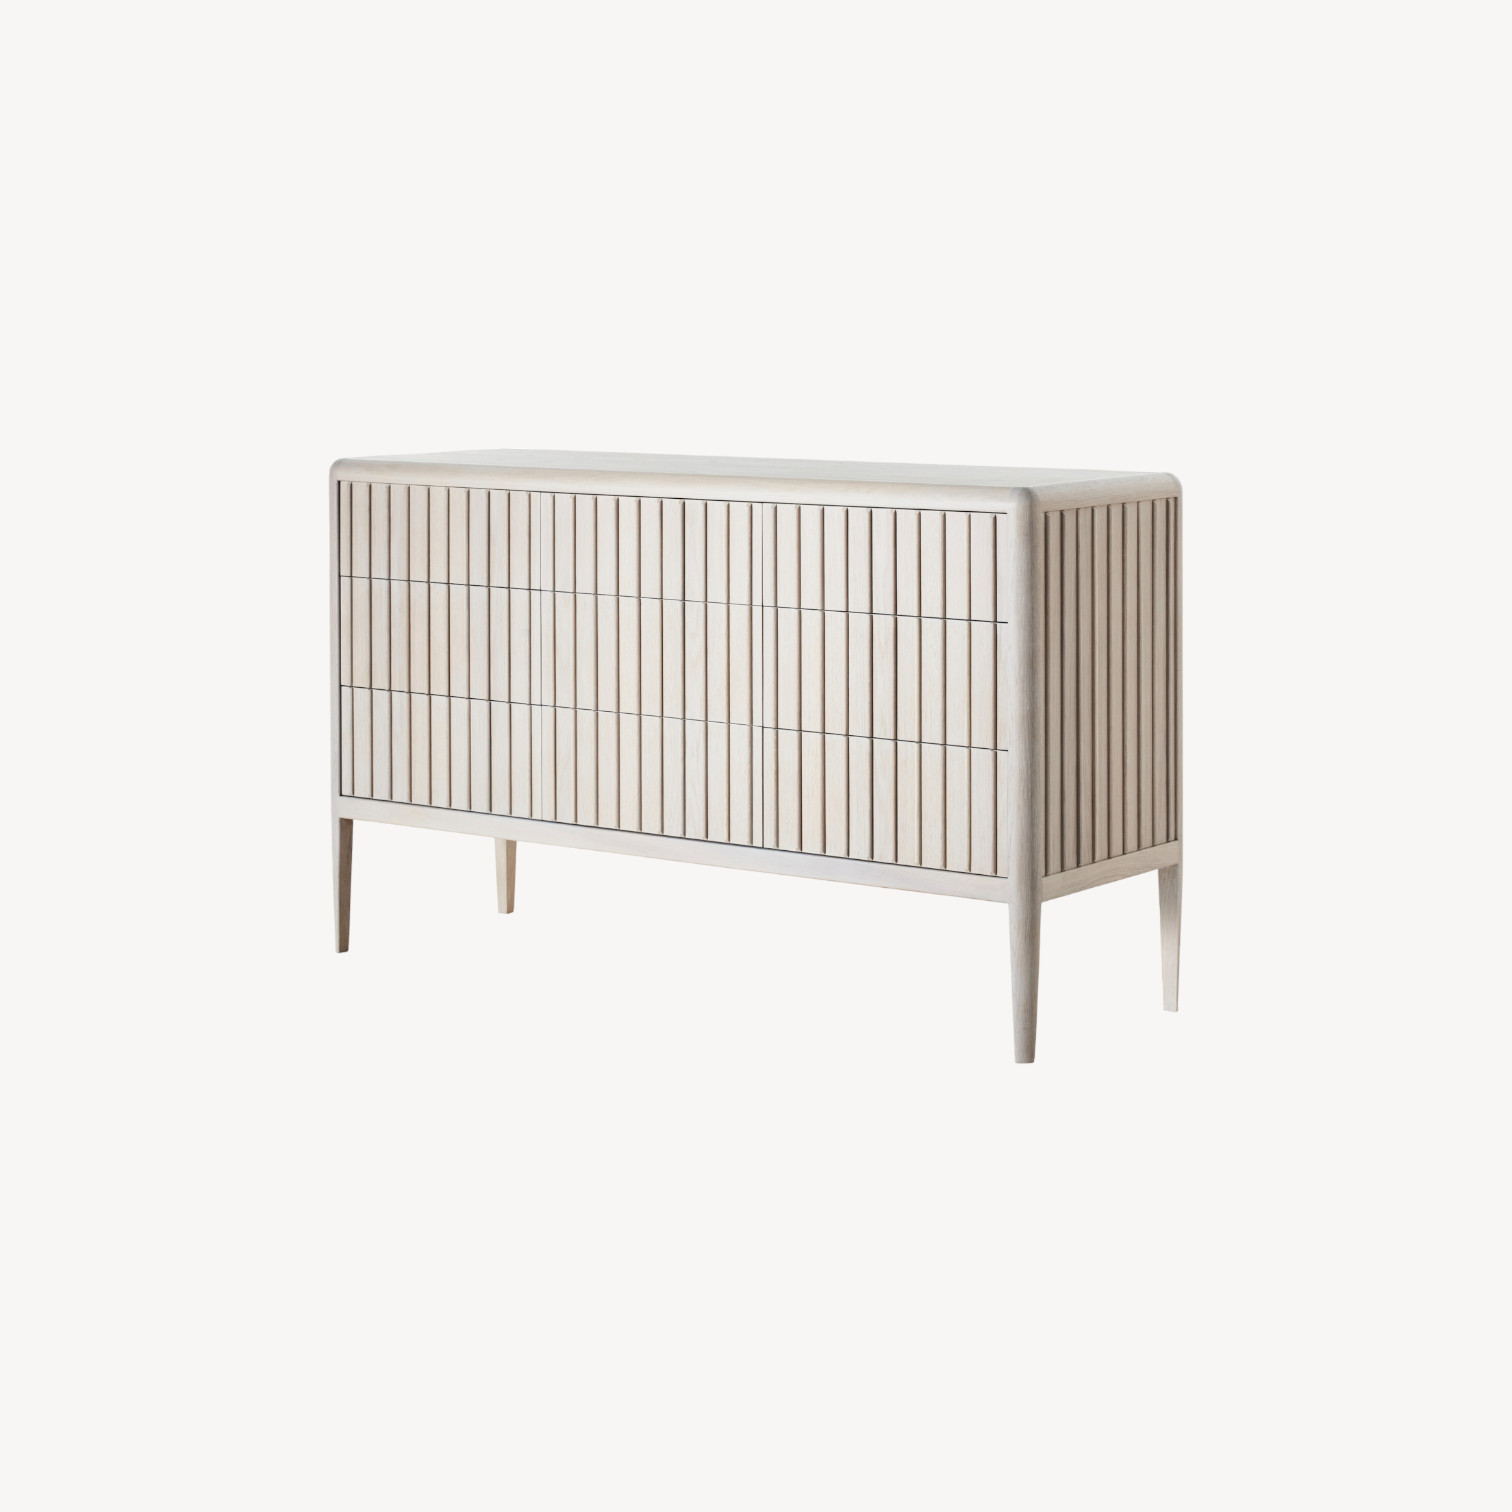 Cloud Chest of Drawers - Zuster Furniture